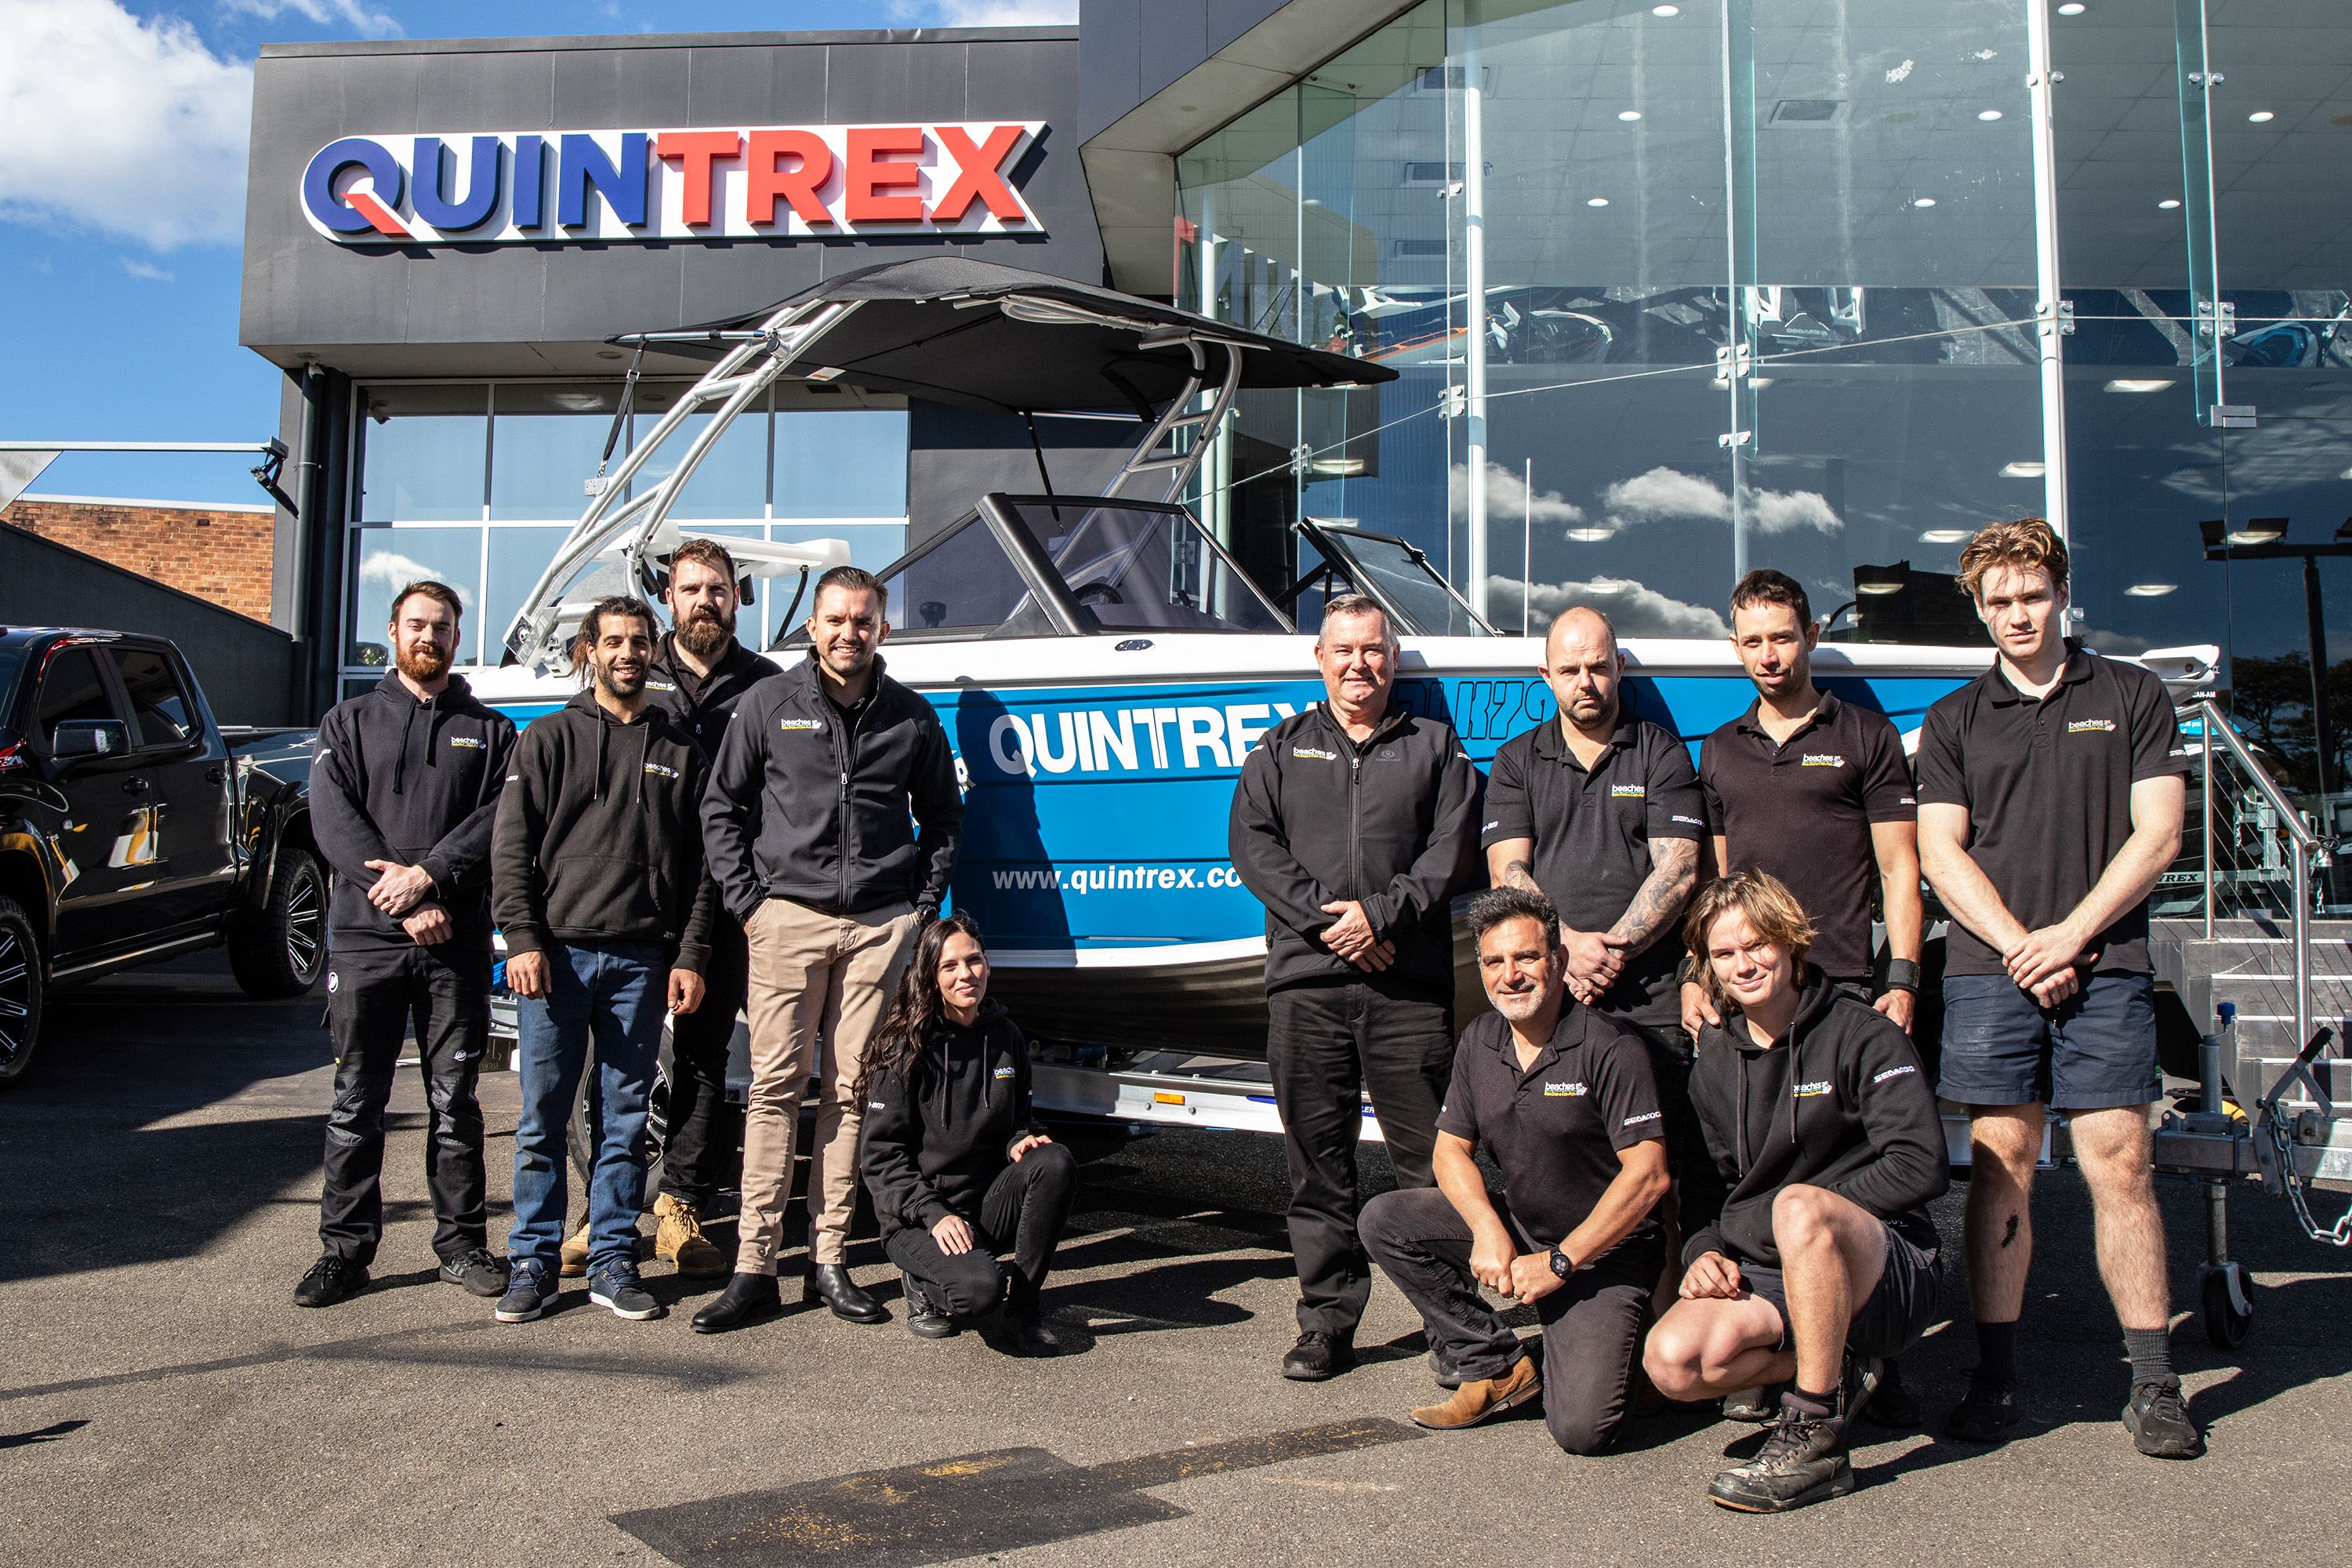 QUINTREX HAS ENTERED THE HEART OF SYDNEY AND IS ALL SET TO MAKE A SPLASH IN THE NORTHERN BEACHES